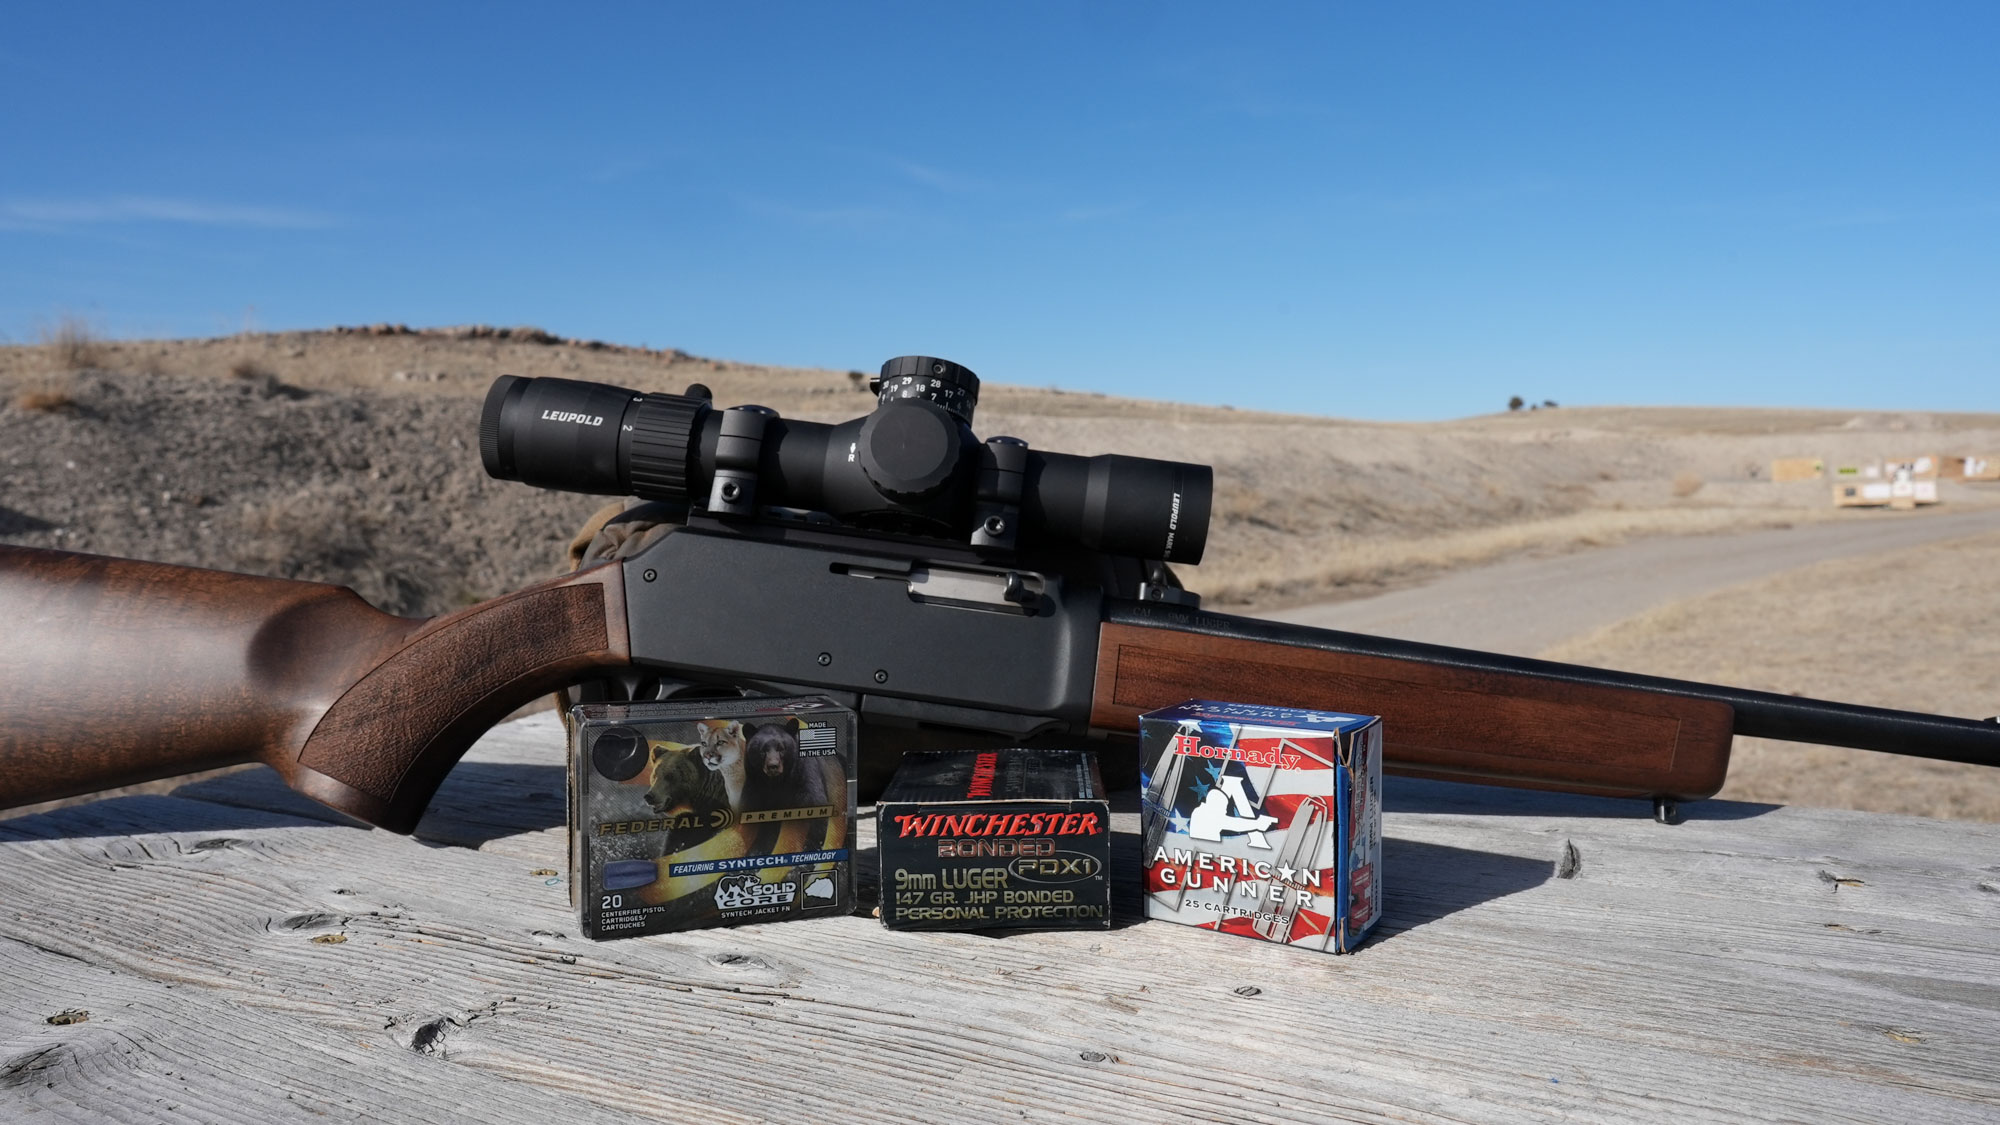 Henry Homesteader 9mm Carbine, Tested and Reviewed